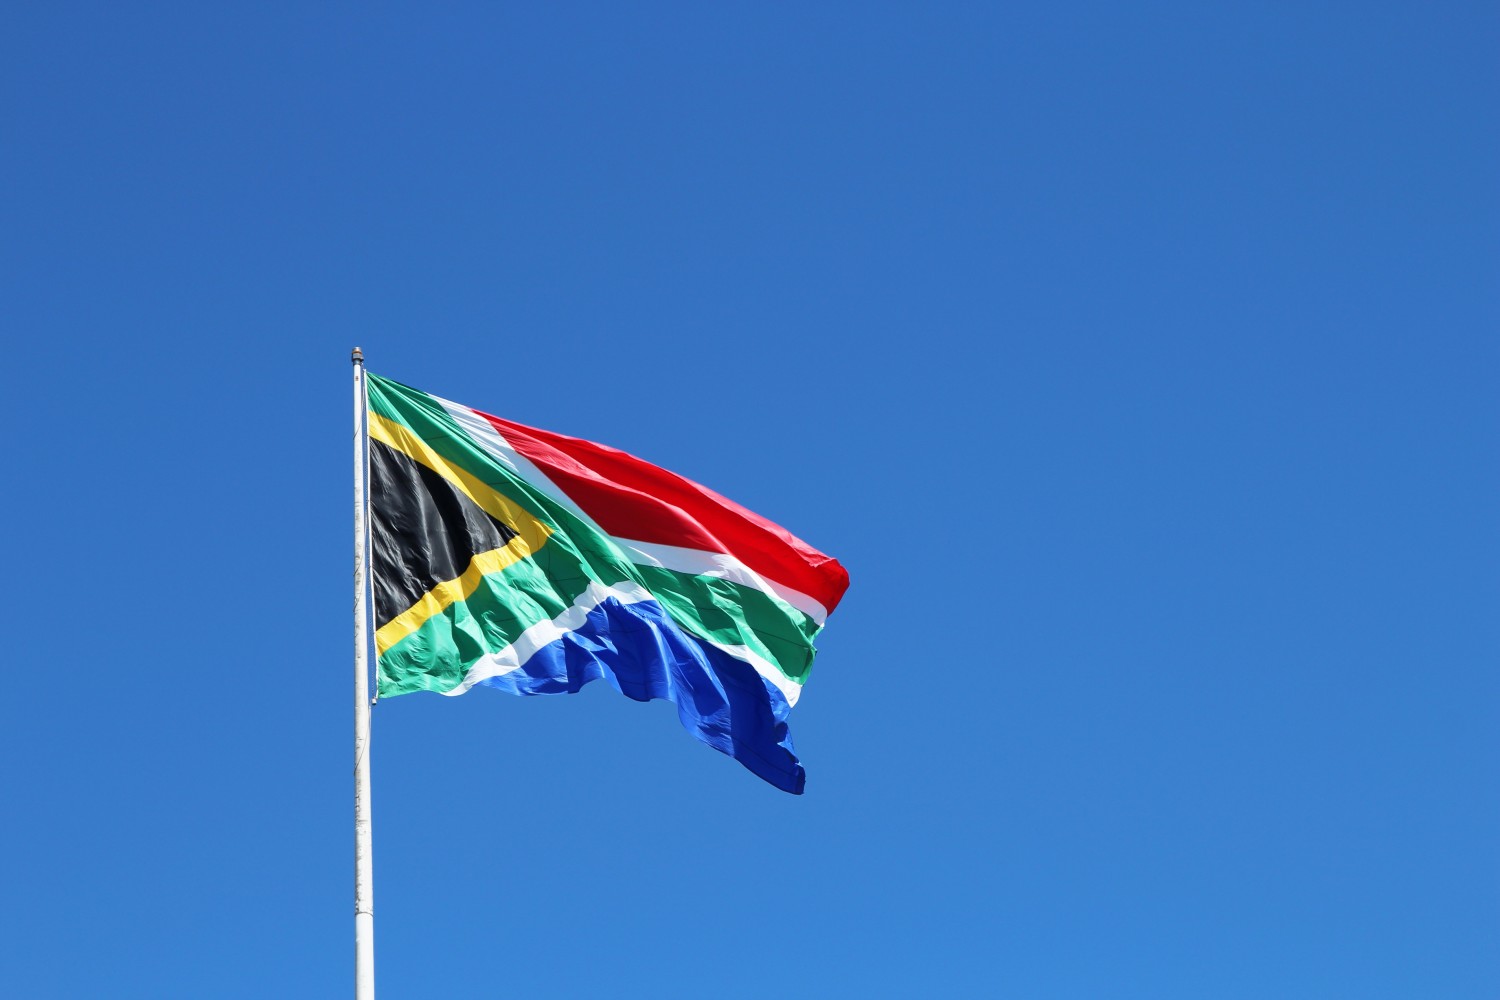 South Africa: Competition Policy and Inequality